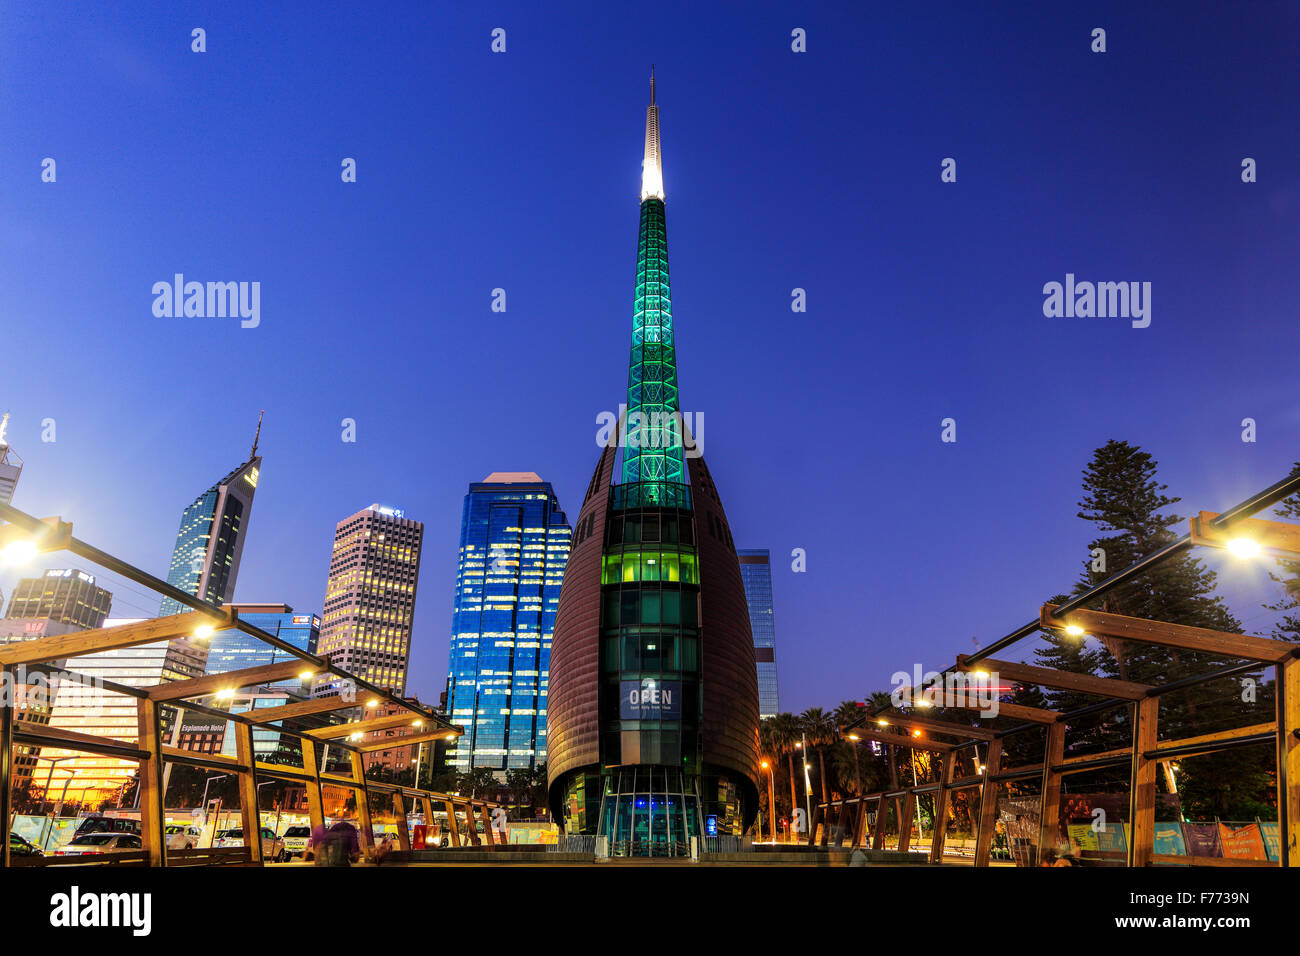 The Bell Tower at Barrack Square, Perth, Western Australia. Stock Photo